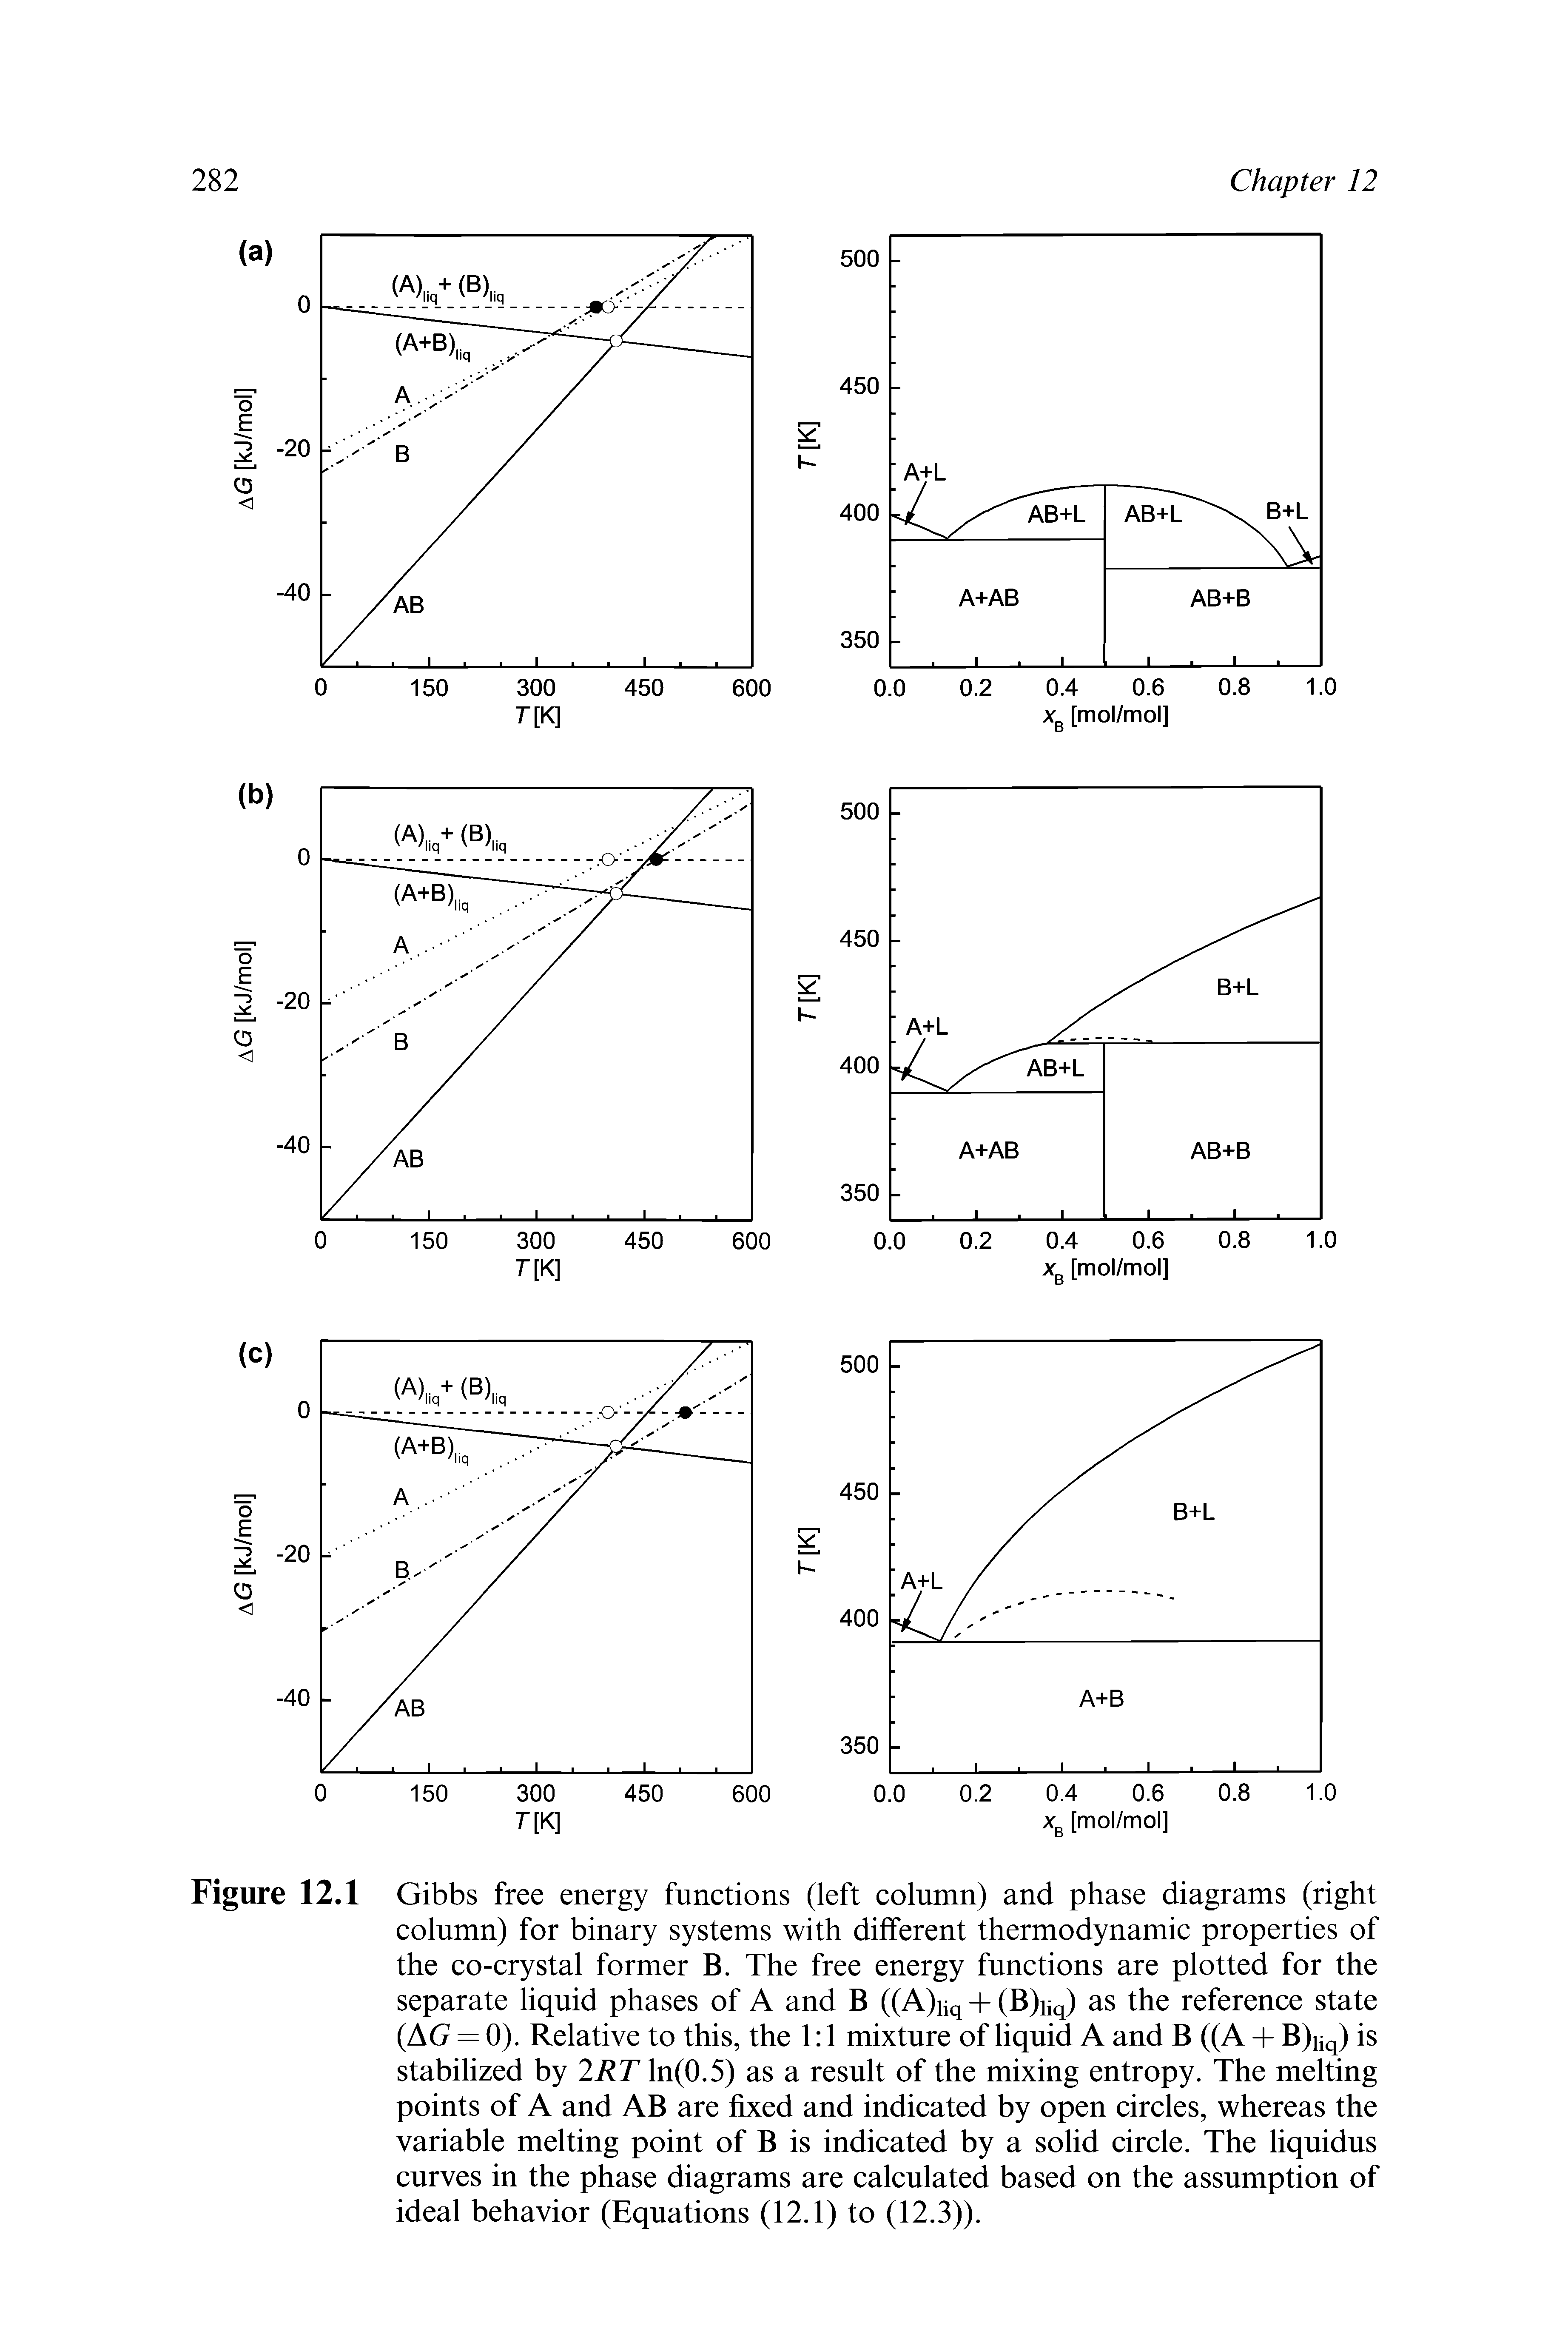 Figure 12.1 Gibbs free energy functions (left column) and phase diagrams (right column) for binary systems with different thermodynamic properties of the co-crystal former B. The free energy functions are plotted for the separate liquid phases of A and B ((A)iiq + (B)iiq) as the reference state (AG = 0). Relative to this, the 1 1 mixture of liquid A and B ((A + B)iiq) is stabilized by 2Rrin(0.5) as a result of the mixing entropy. The melting points of A and AB are fixed and indicated by open circles, whereas the variable melting point of B is indicated by a solid circle. The liquidus curves in the phase diagrams are calculated based on the assumption of ideal behavior (Equations (12.1) to (12.3)).